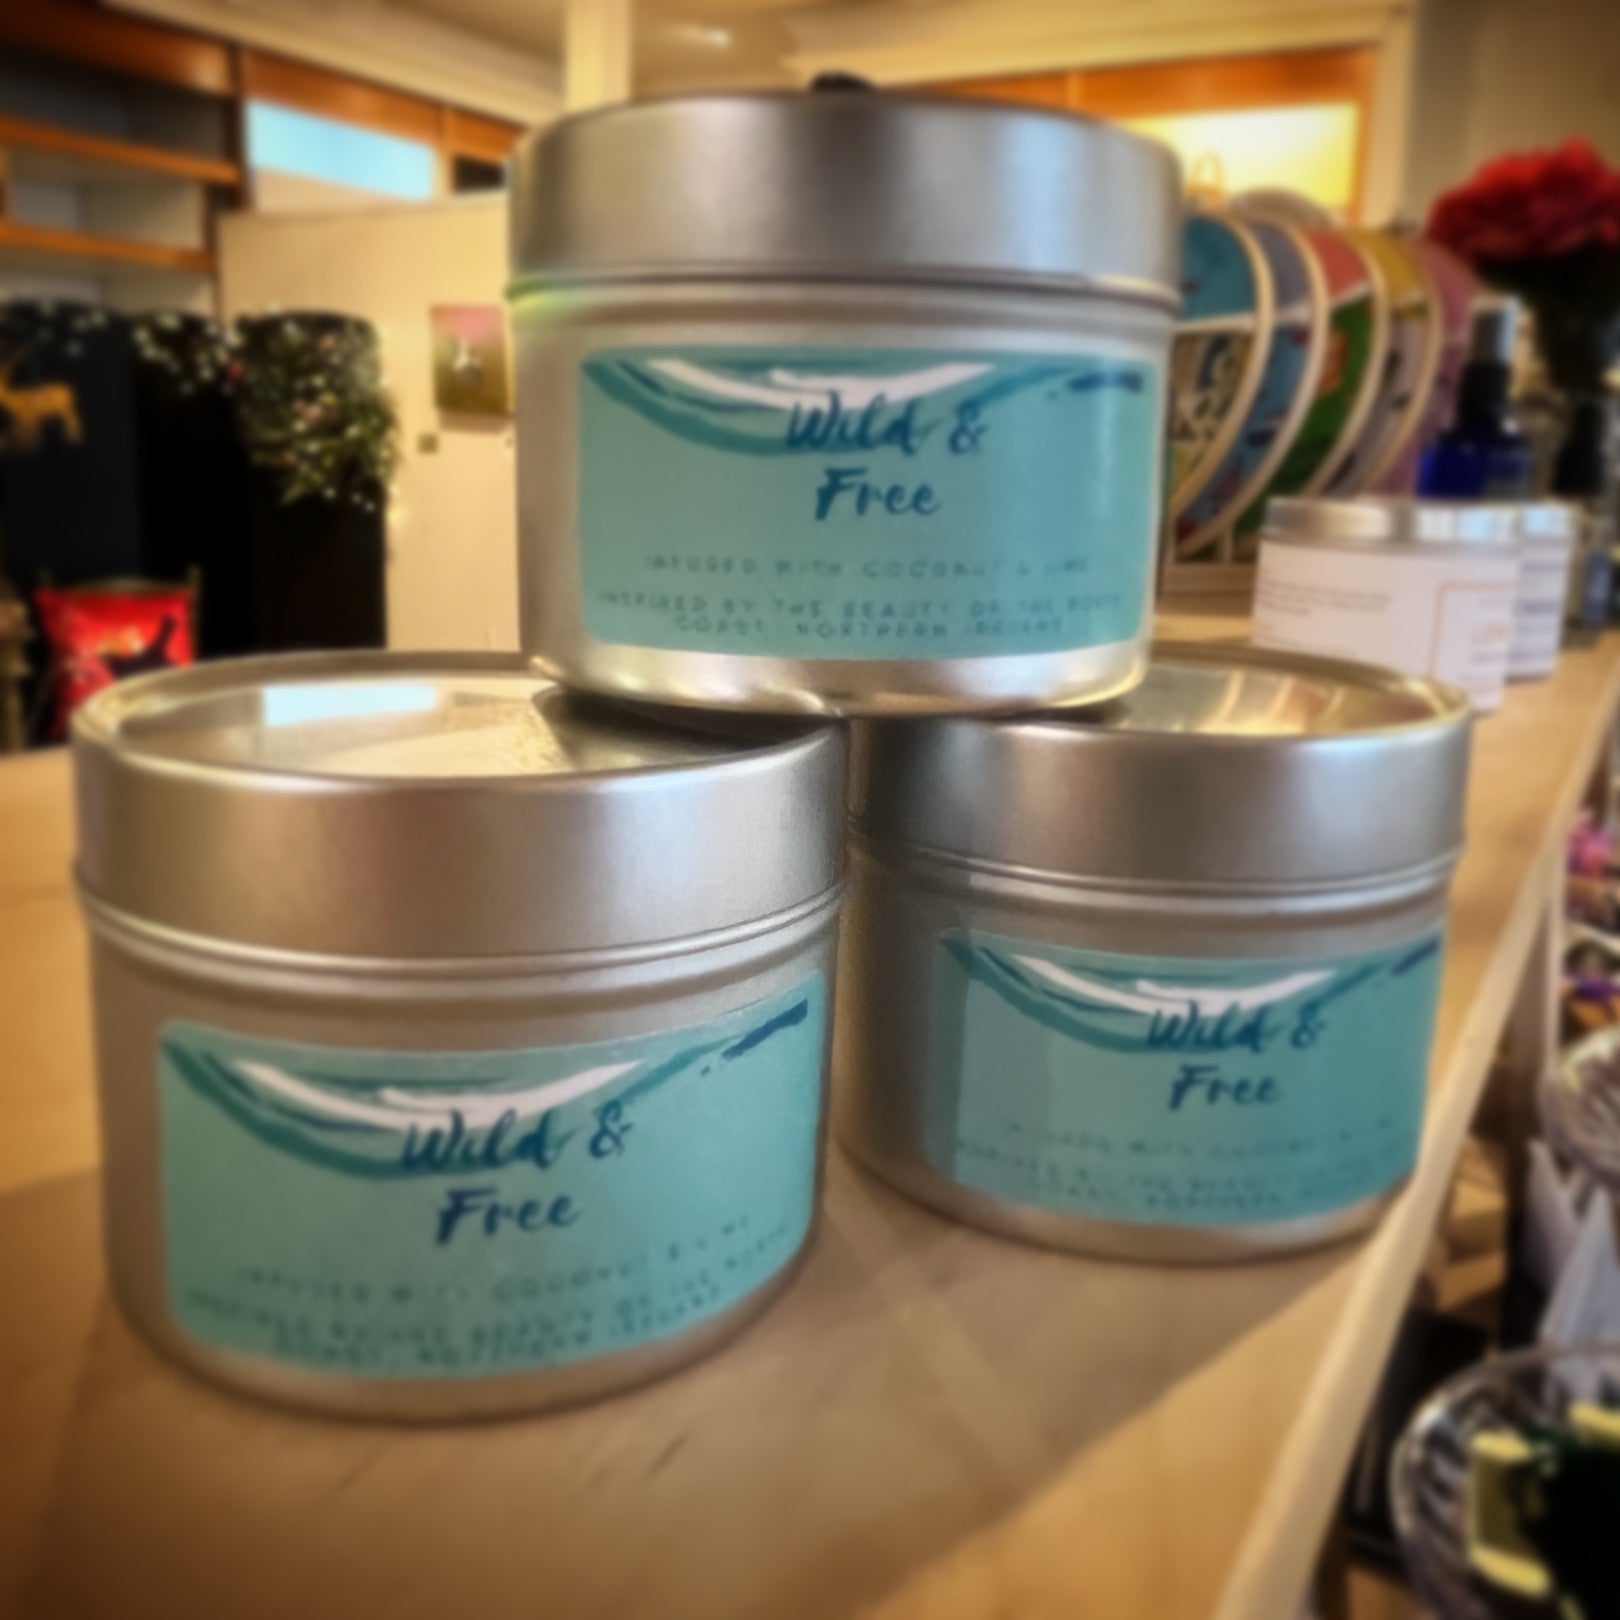 'WILD & FREE' Candle